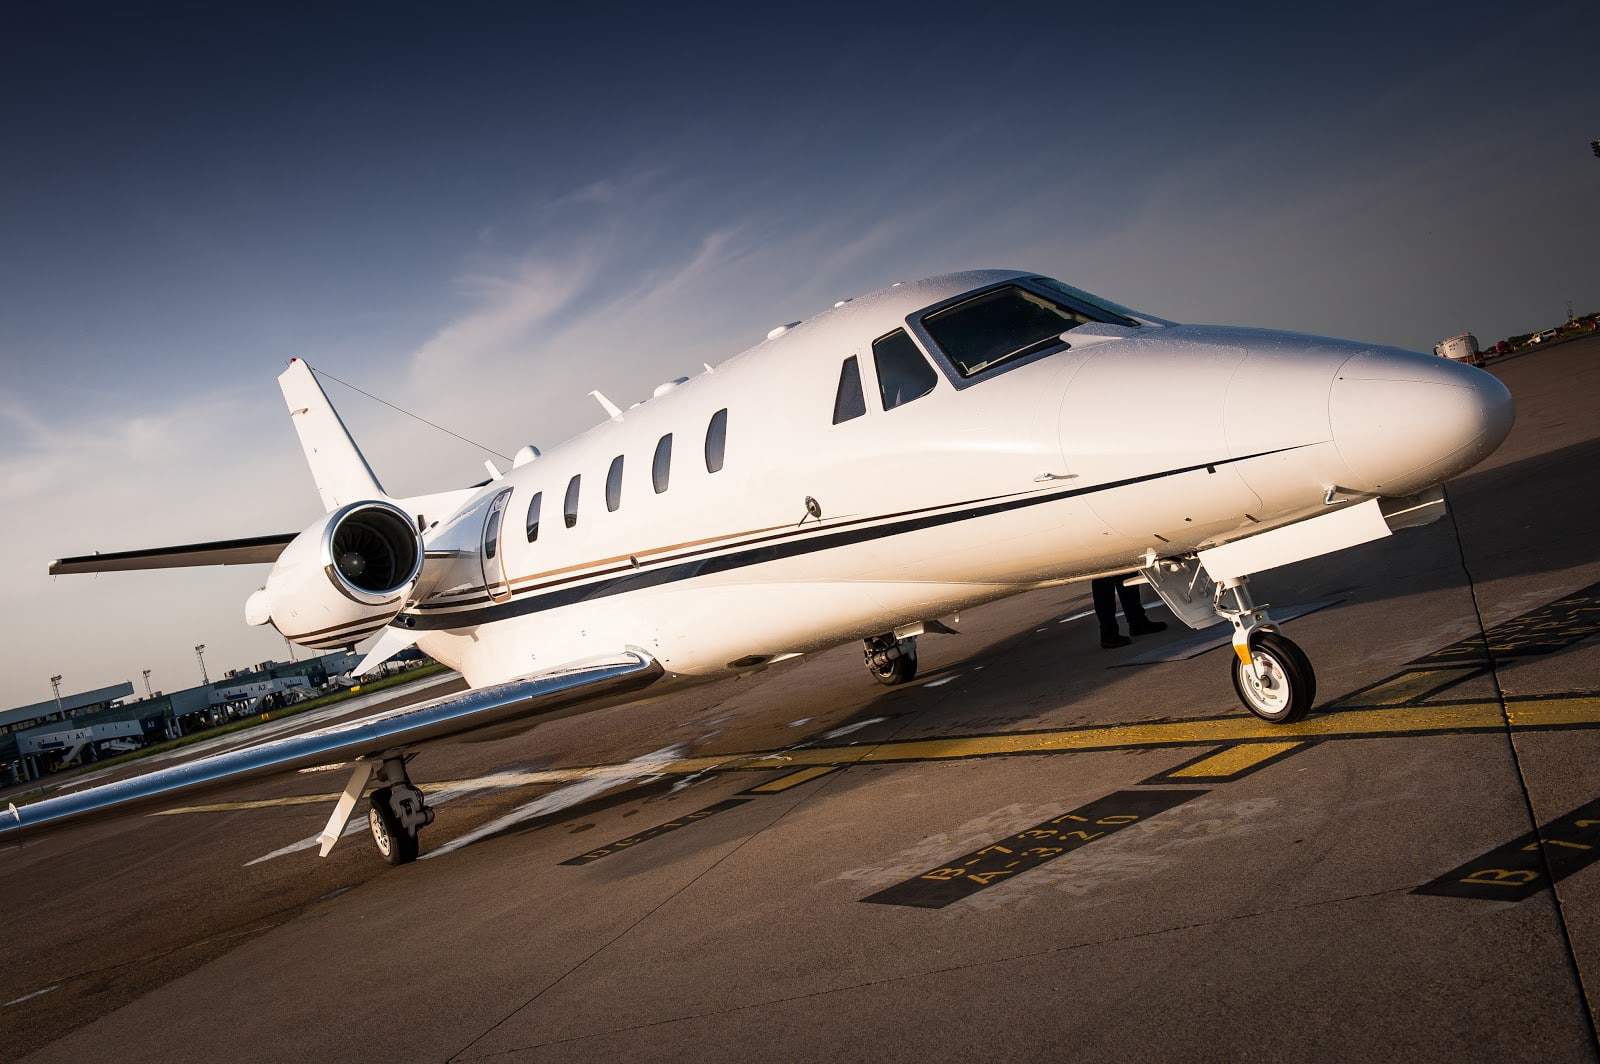 Types of private jets: a jet on the tarmac